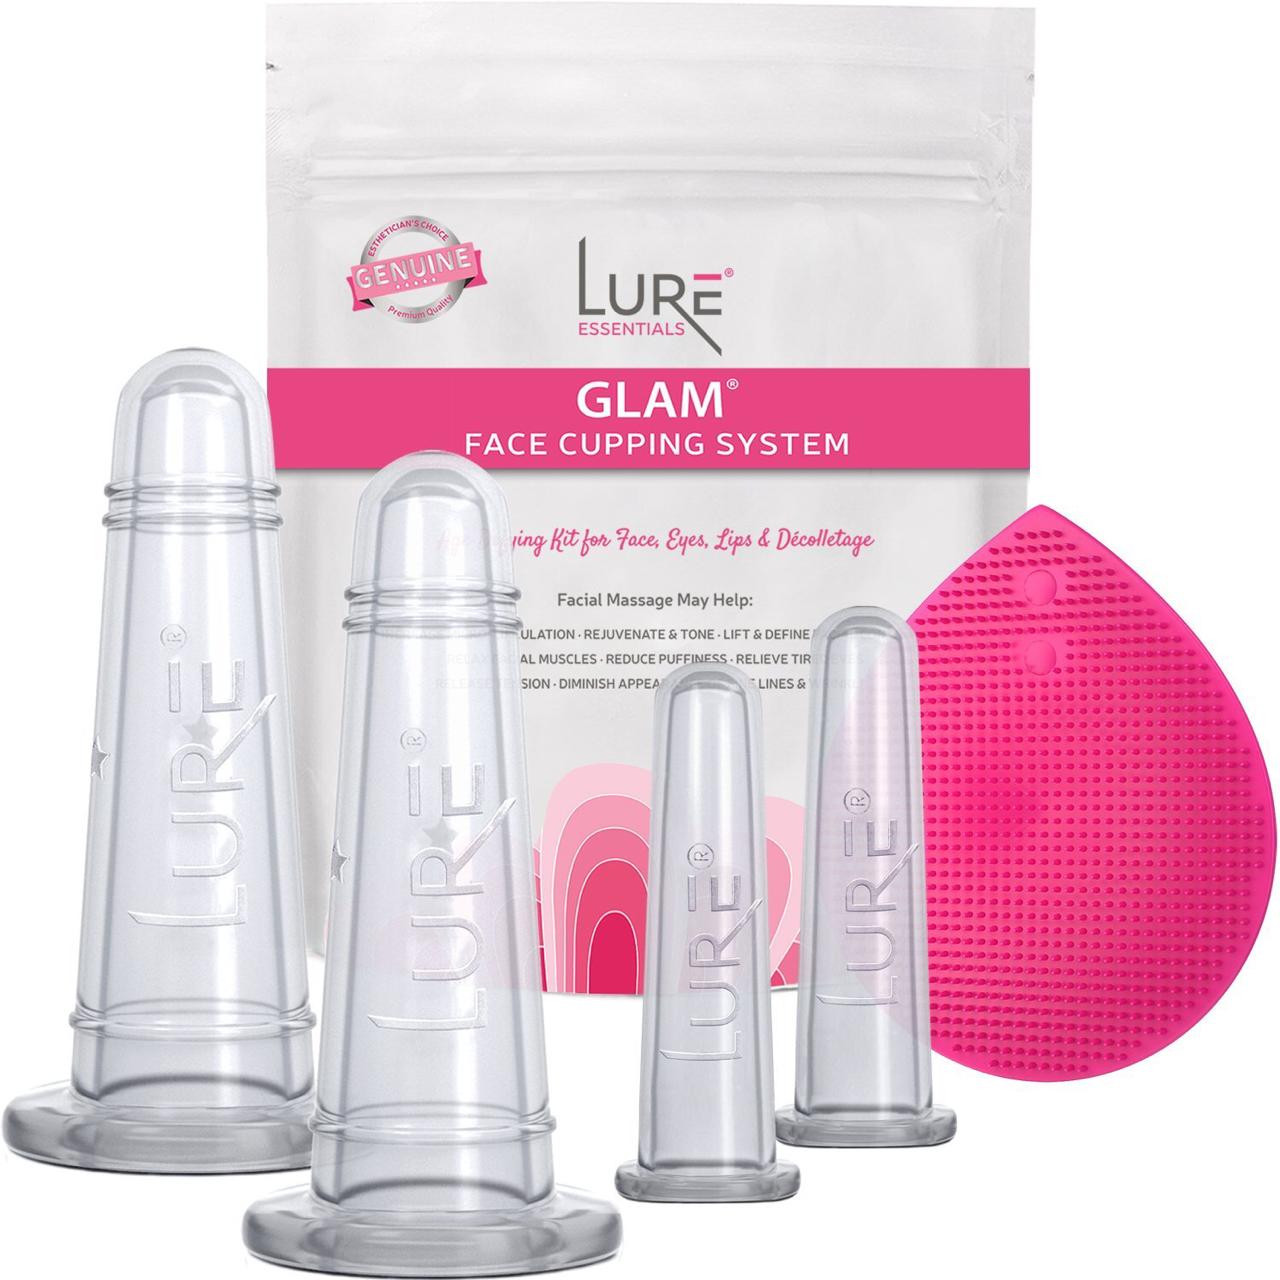 Lure Glam Facial Cupping Set - Face and Eye Cupping Massage Kit-LURE ESSENTIALS-HBYTALA